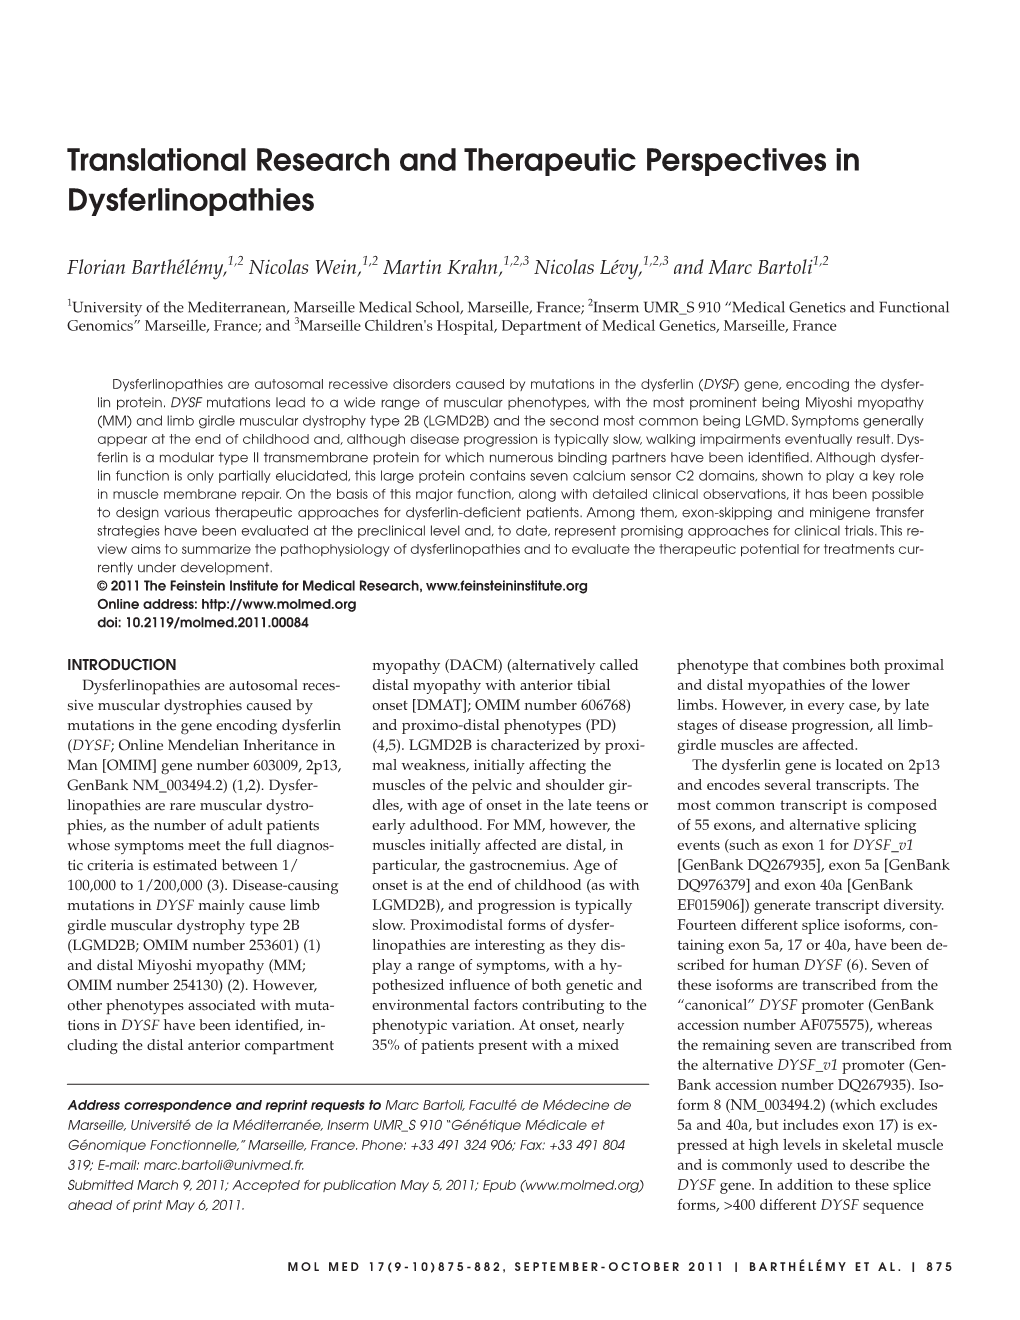 Translational Research and Therapeutic Perspectives in Dysferlinopathies